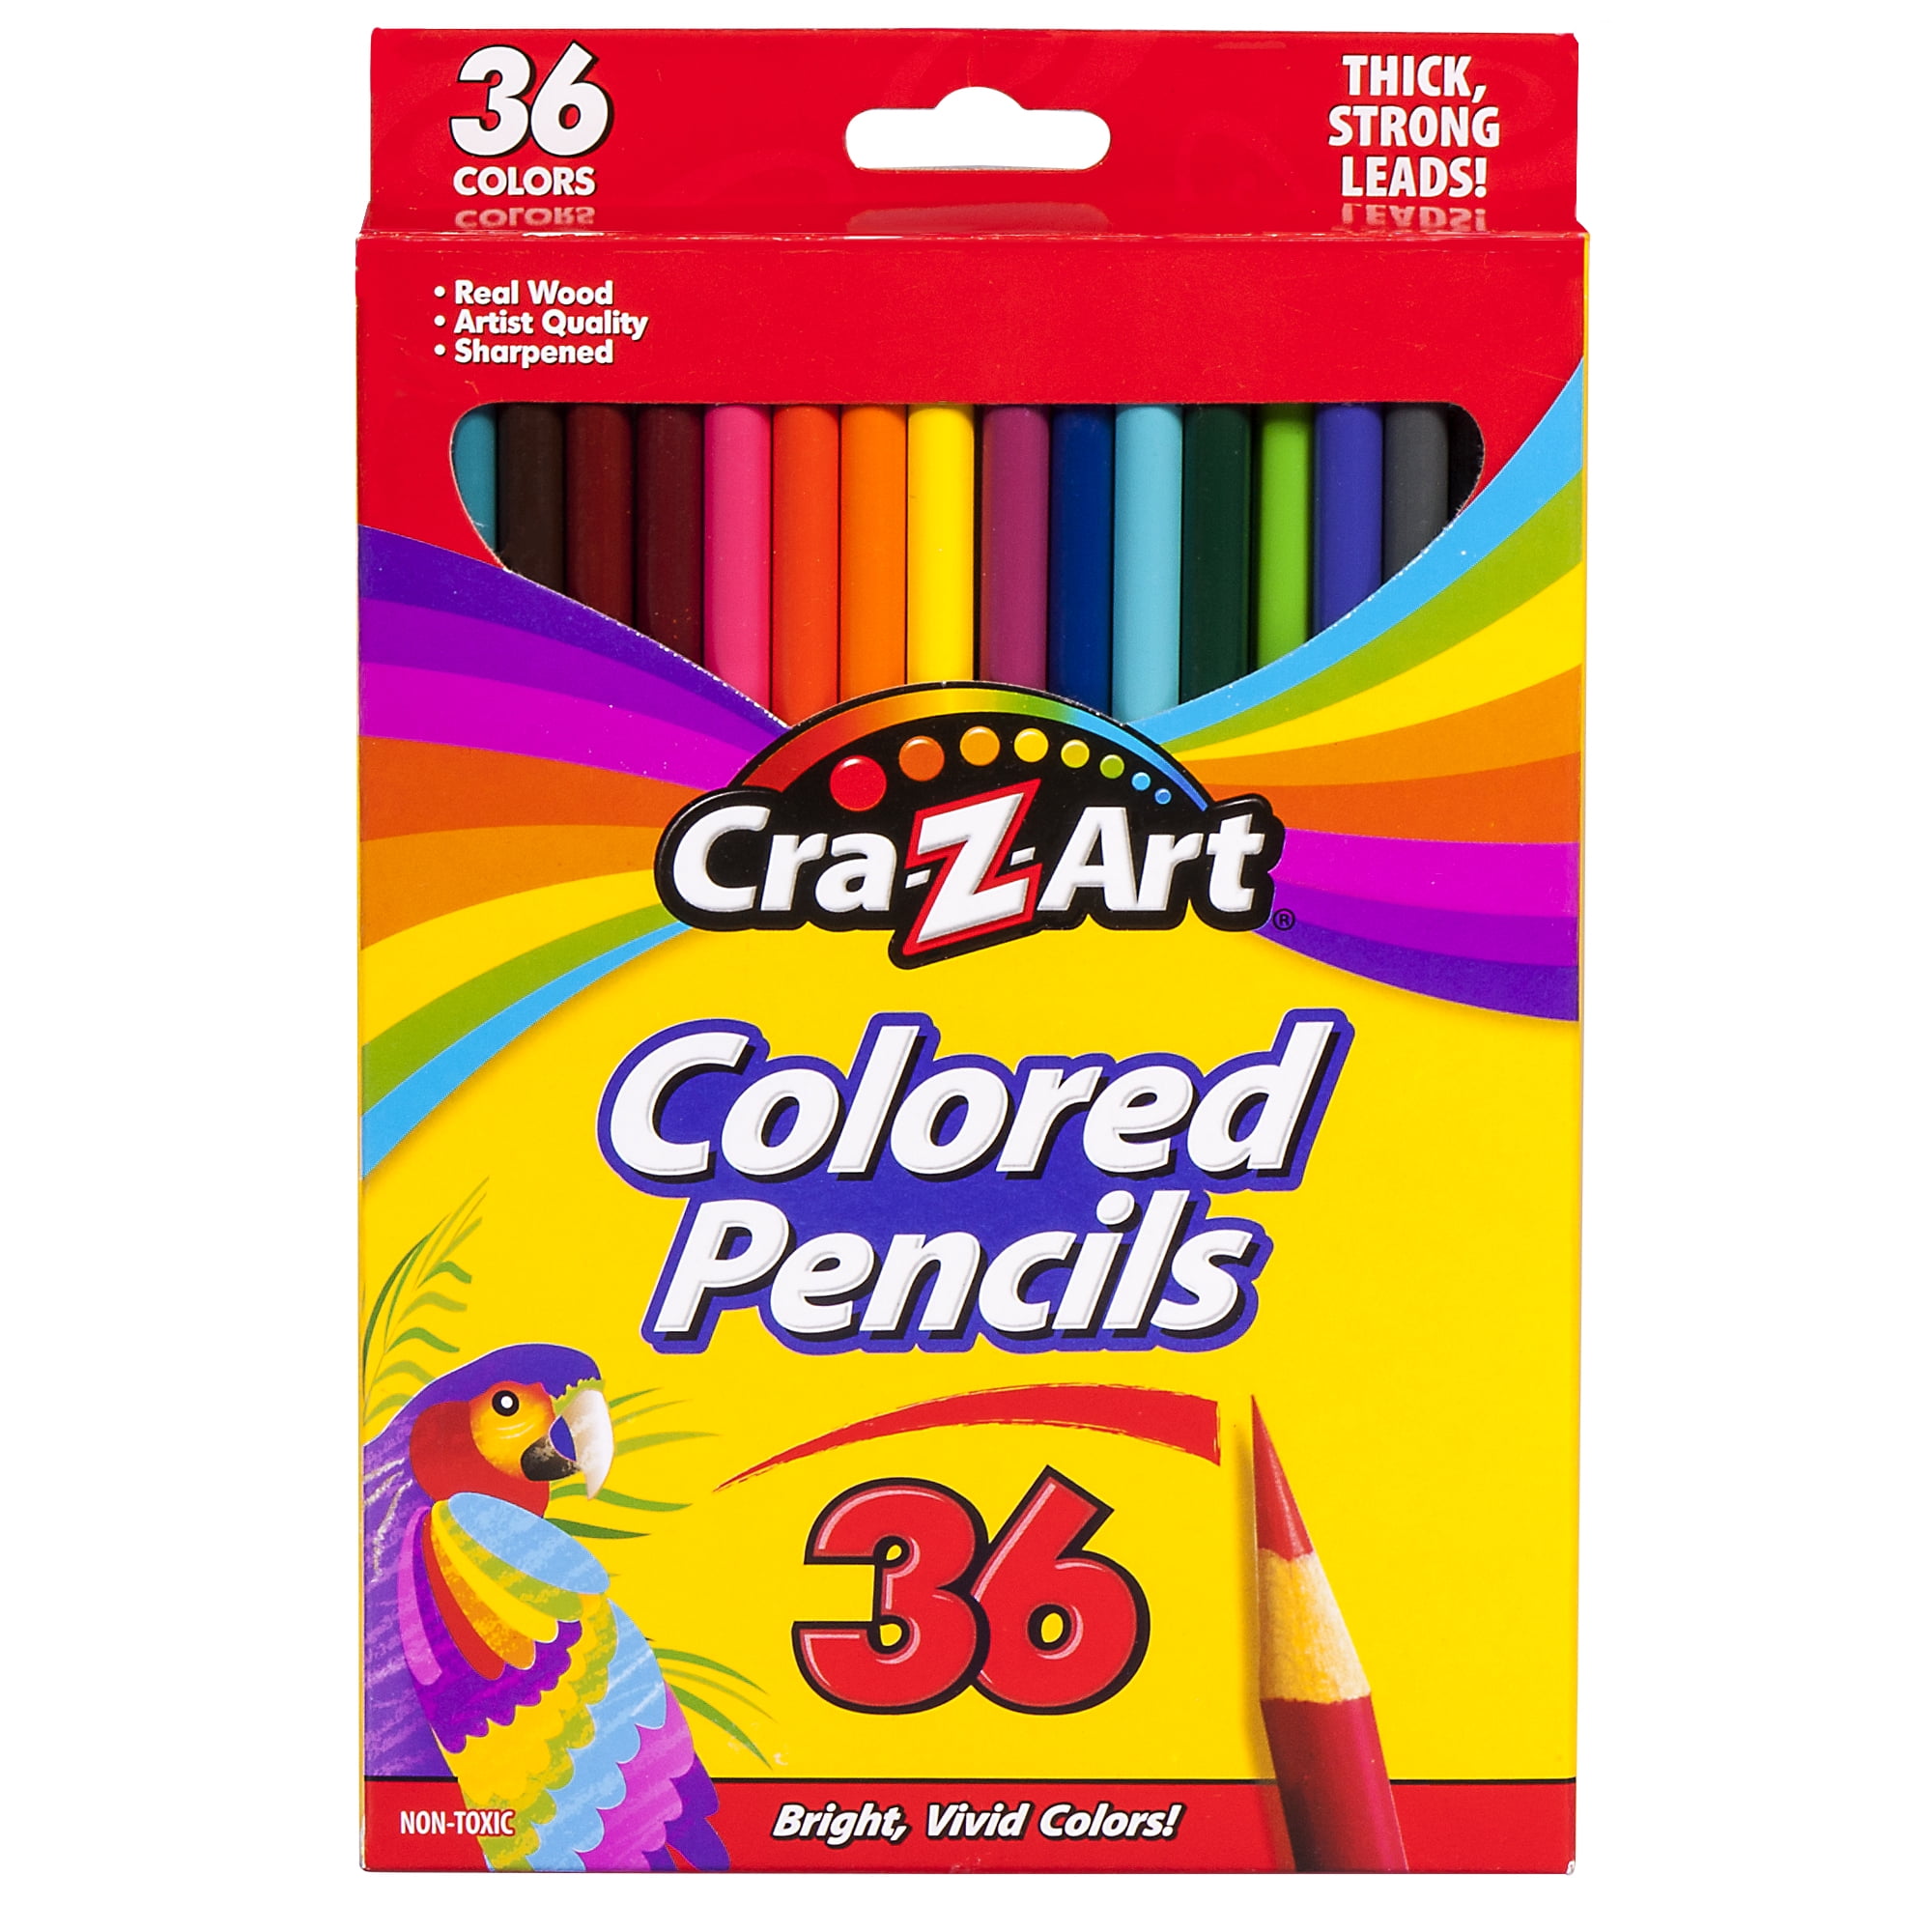 Cra-Z-Art Colored Pencils include many vibrant colors to choose from